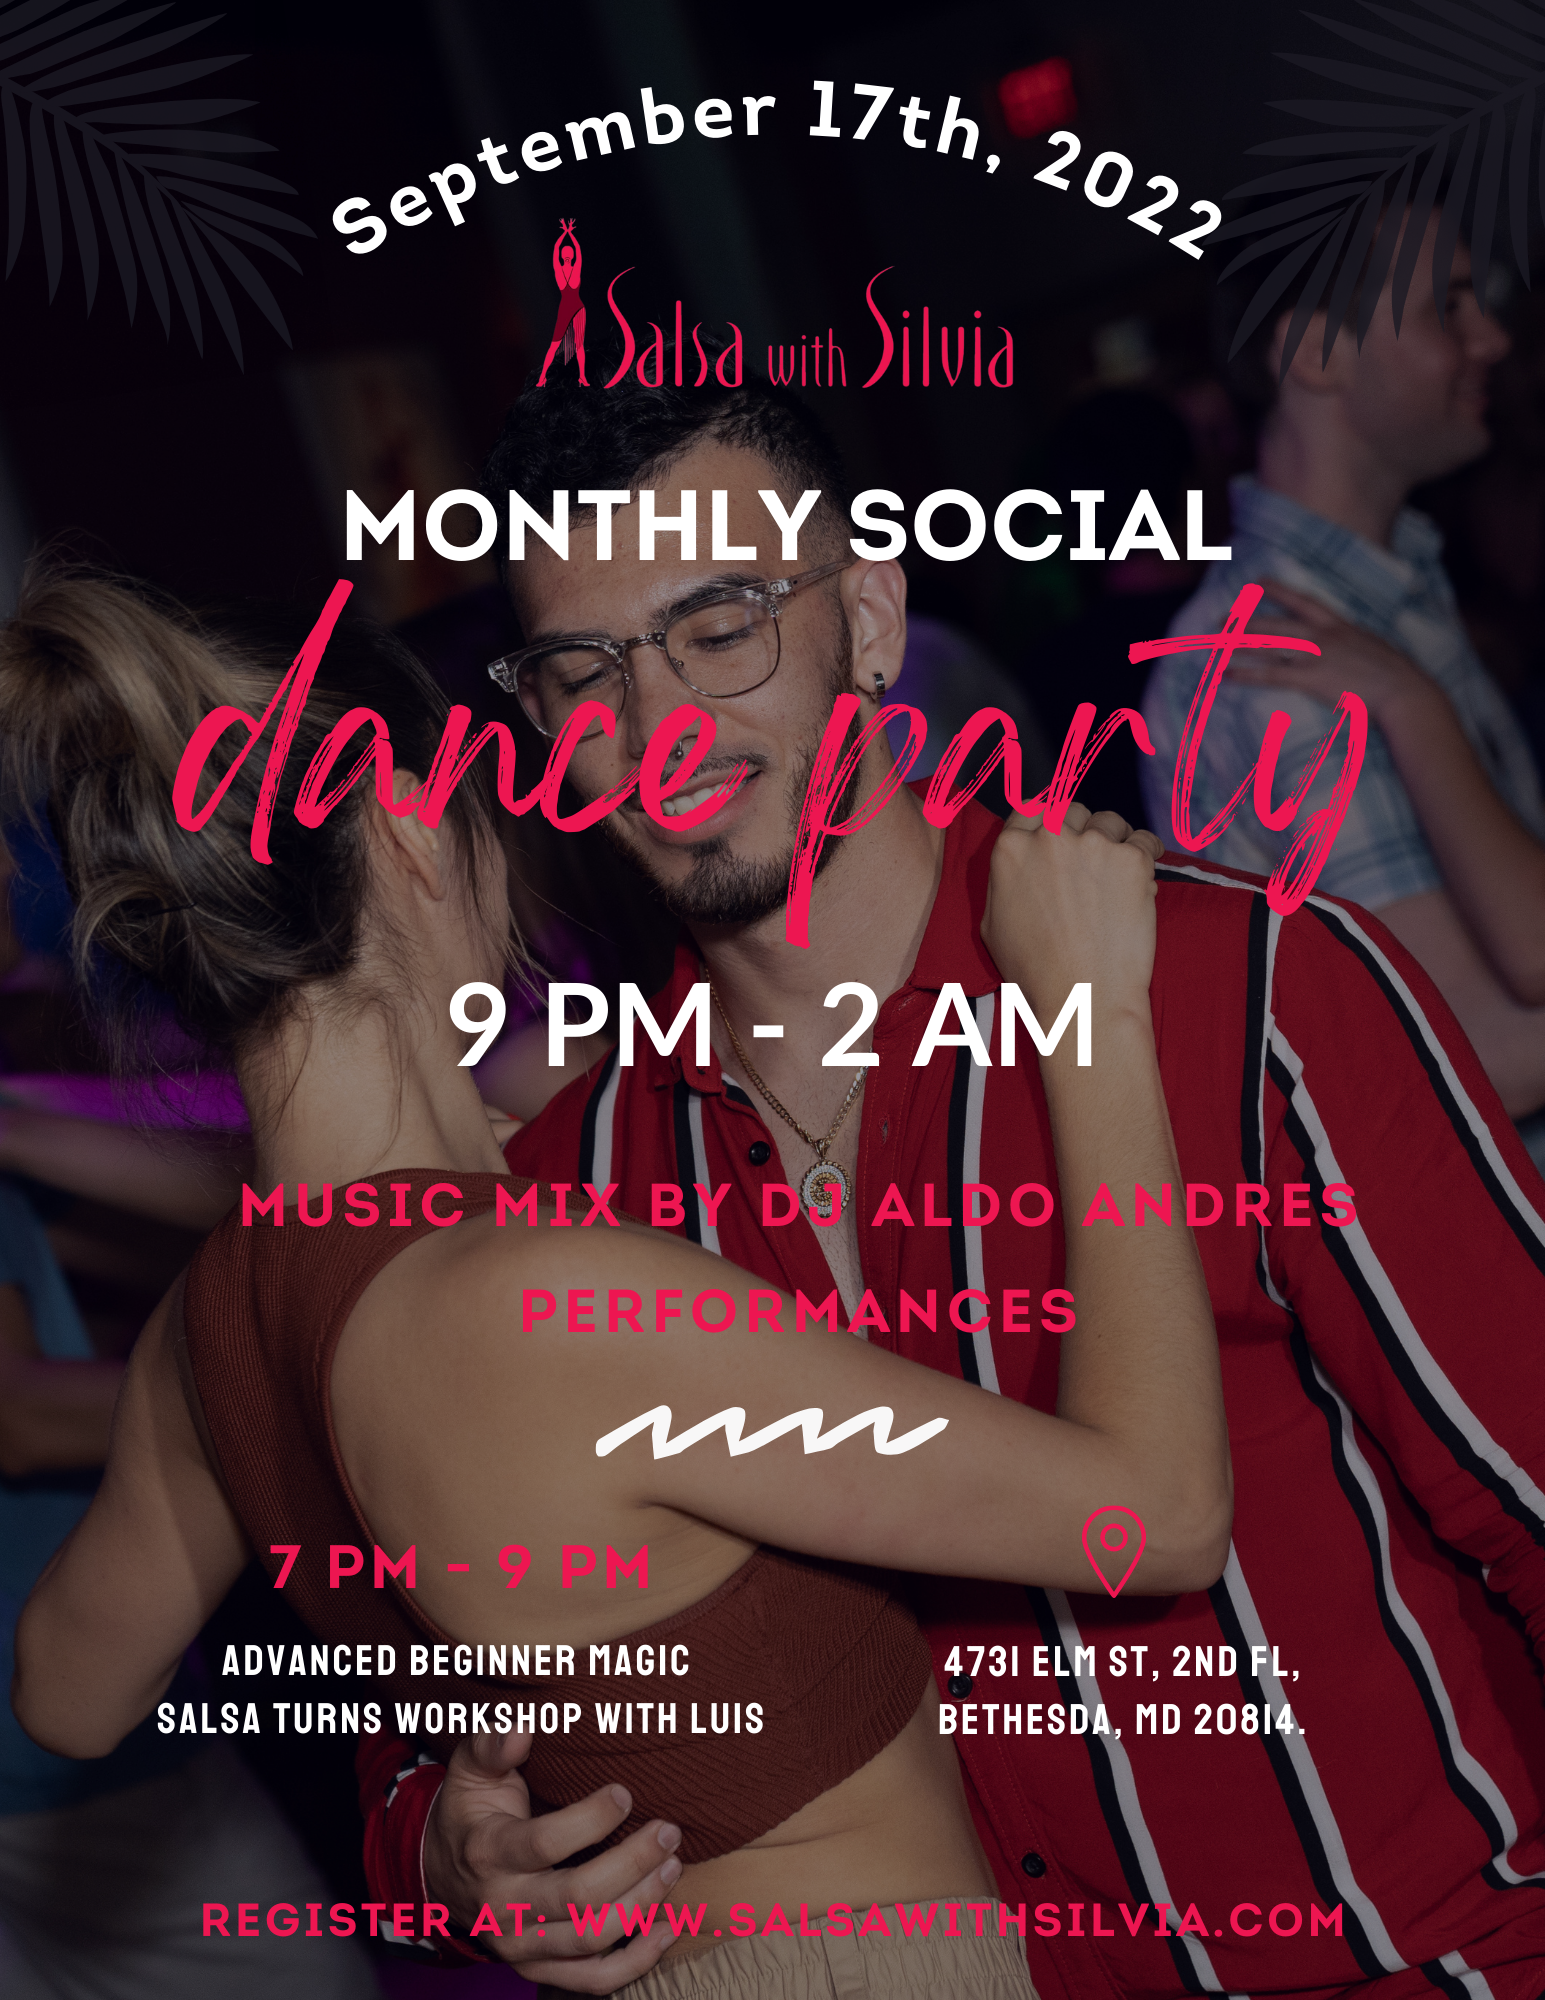 Monthly Social Party + 2-HR Advanced Beginner Salsa Magic Turns Workshop with instructor Luis